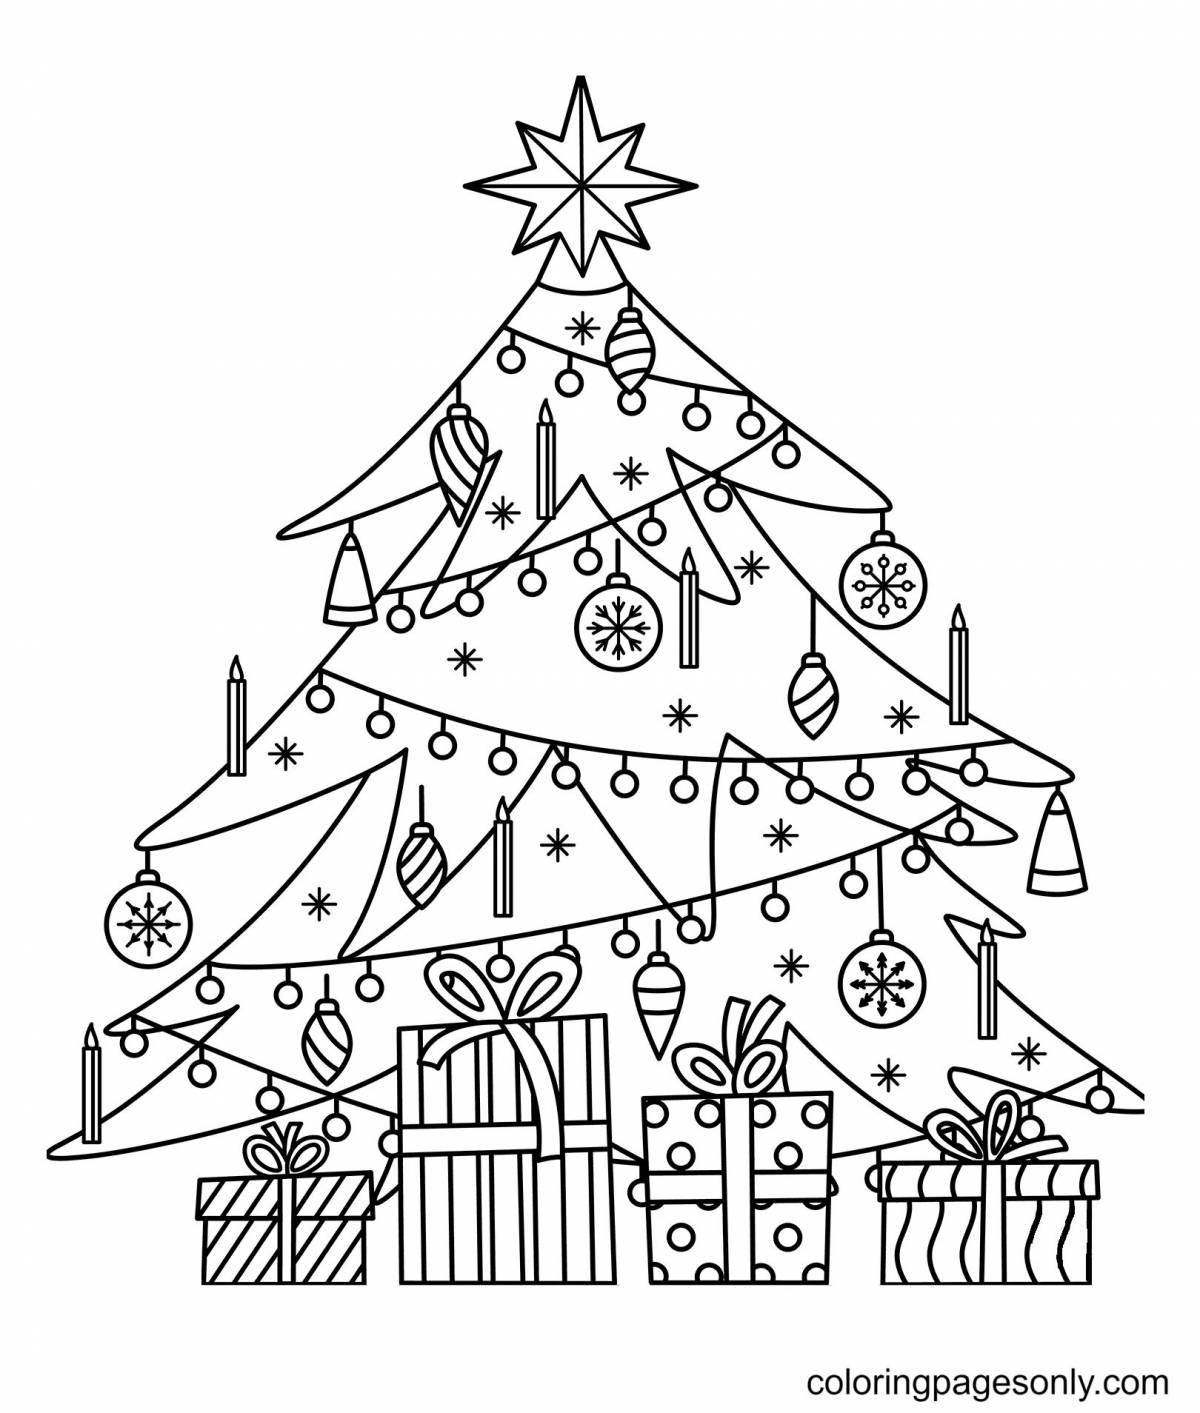 Amazing big tree coloring page